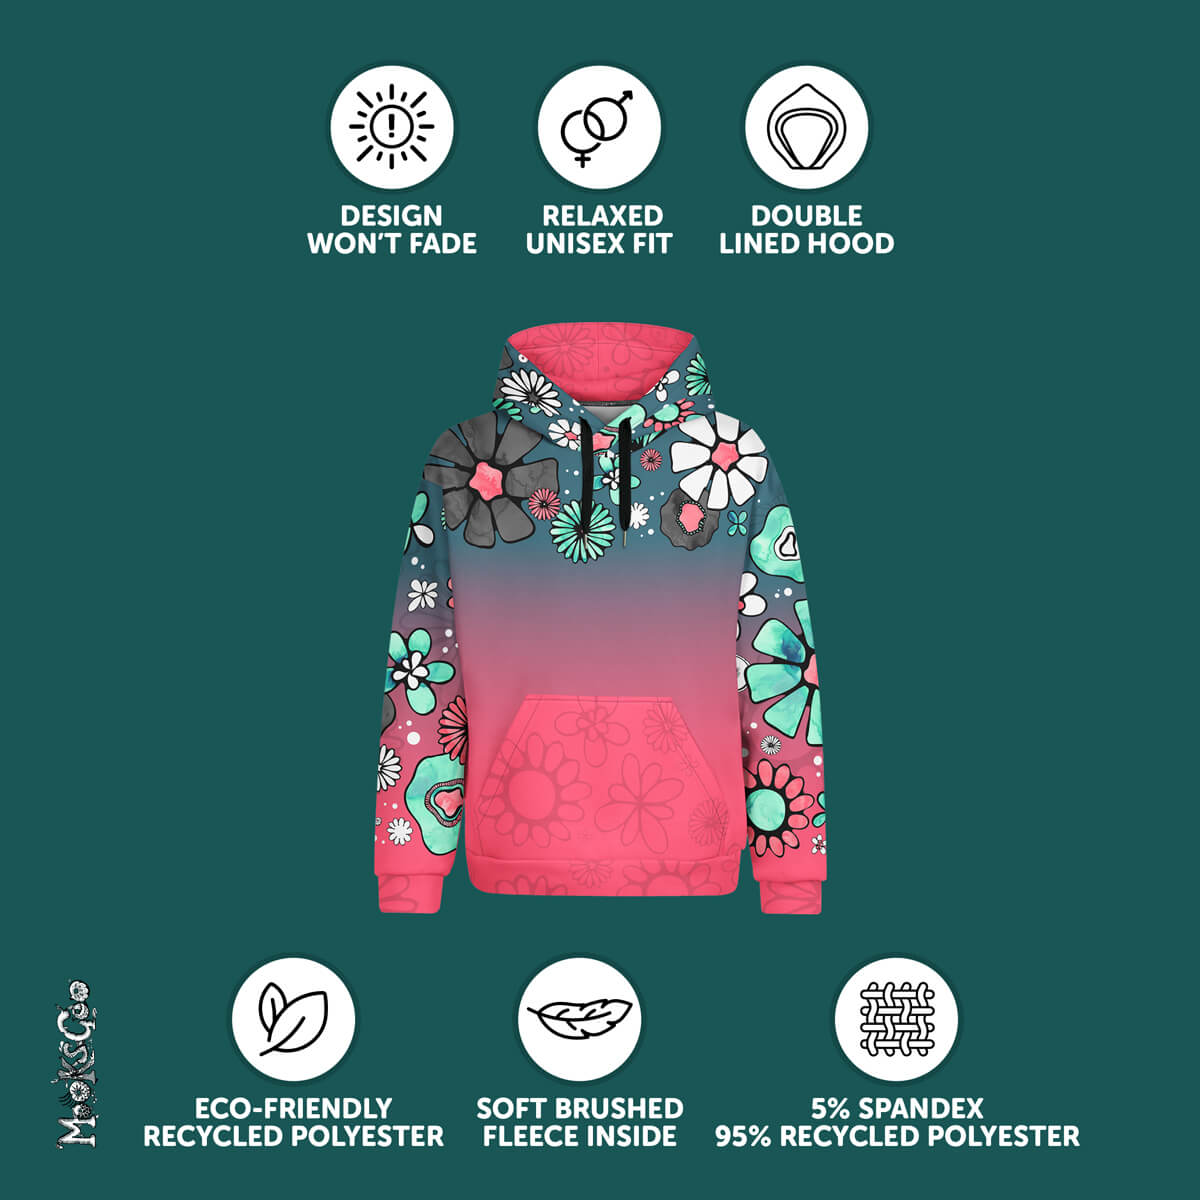 Benefits of the Colour Fade Flower Power recycled unisex hoodie designed by MooksGoo